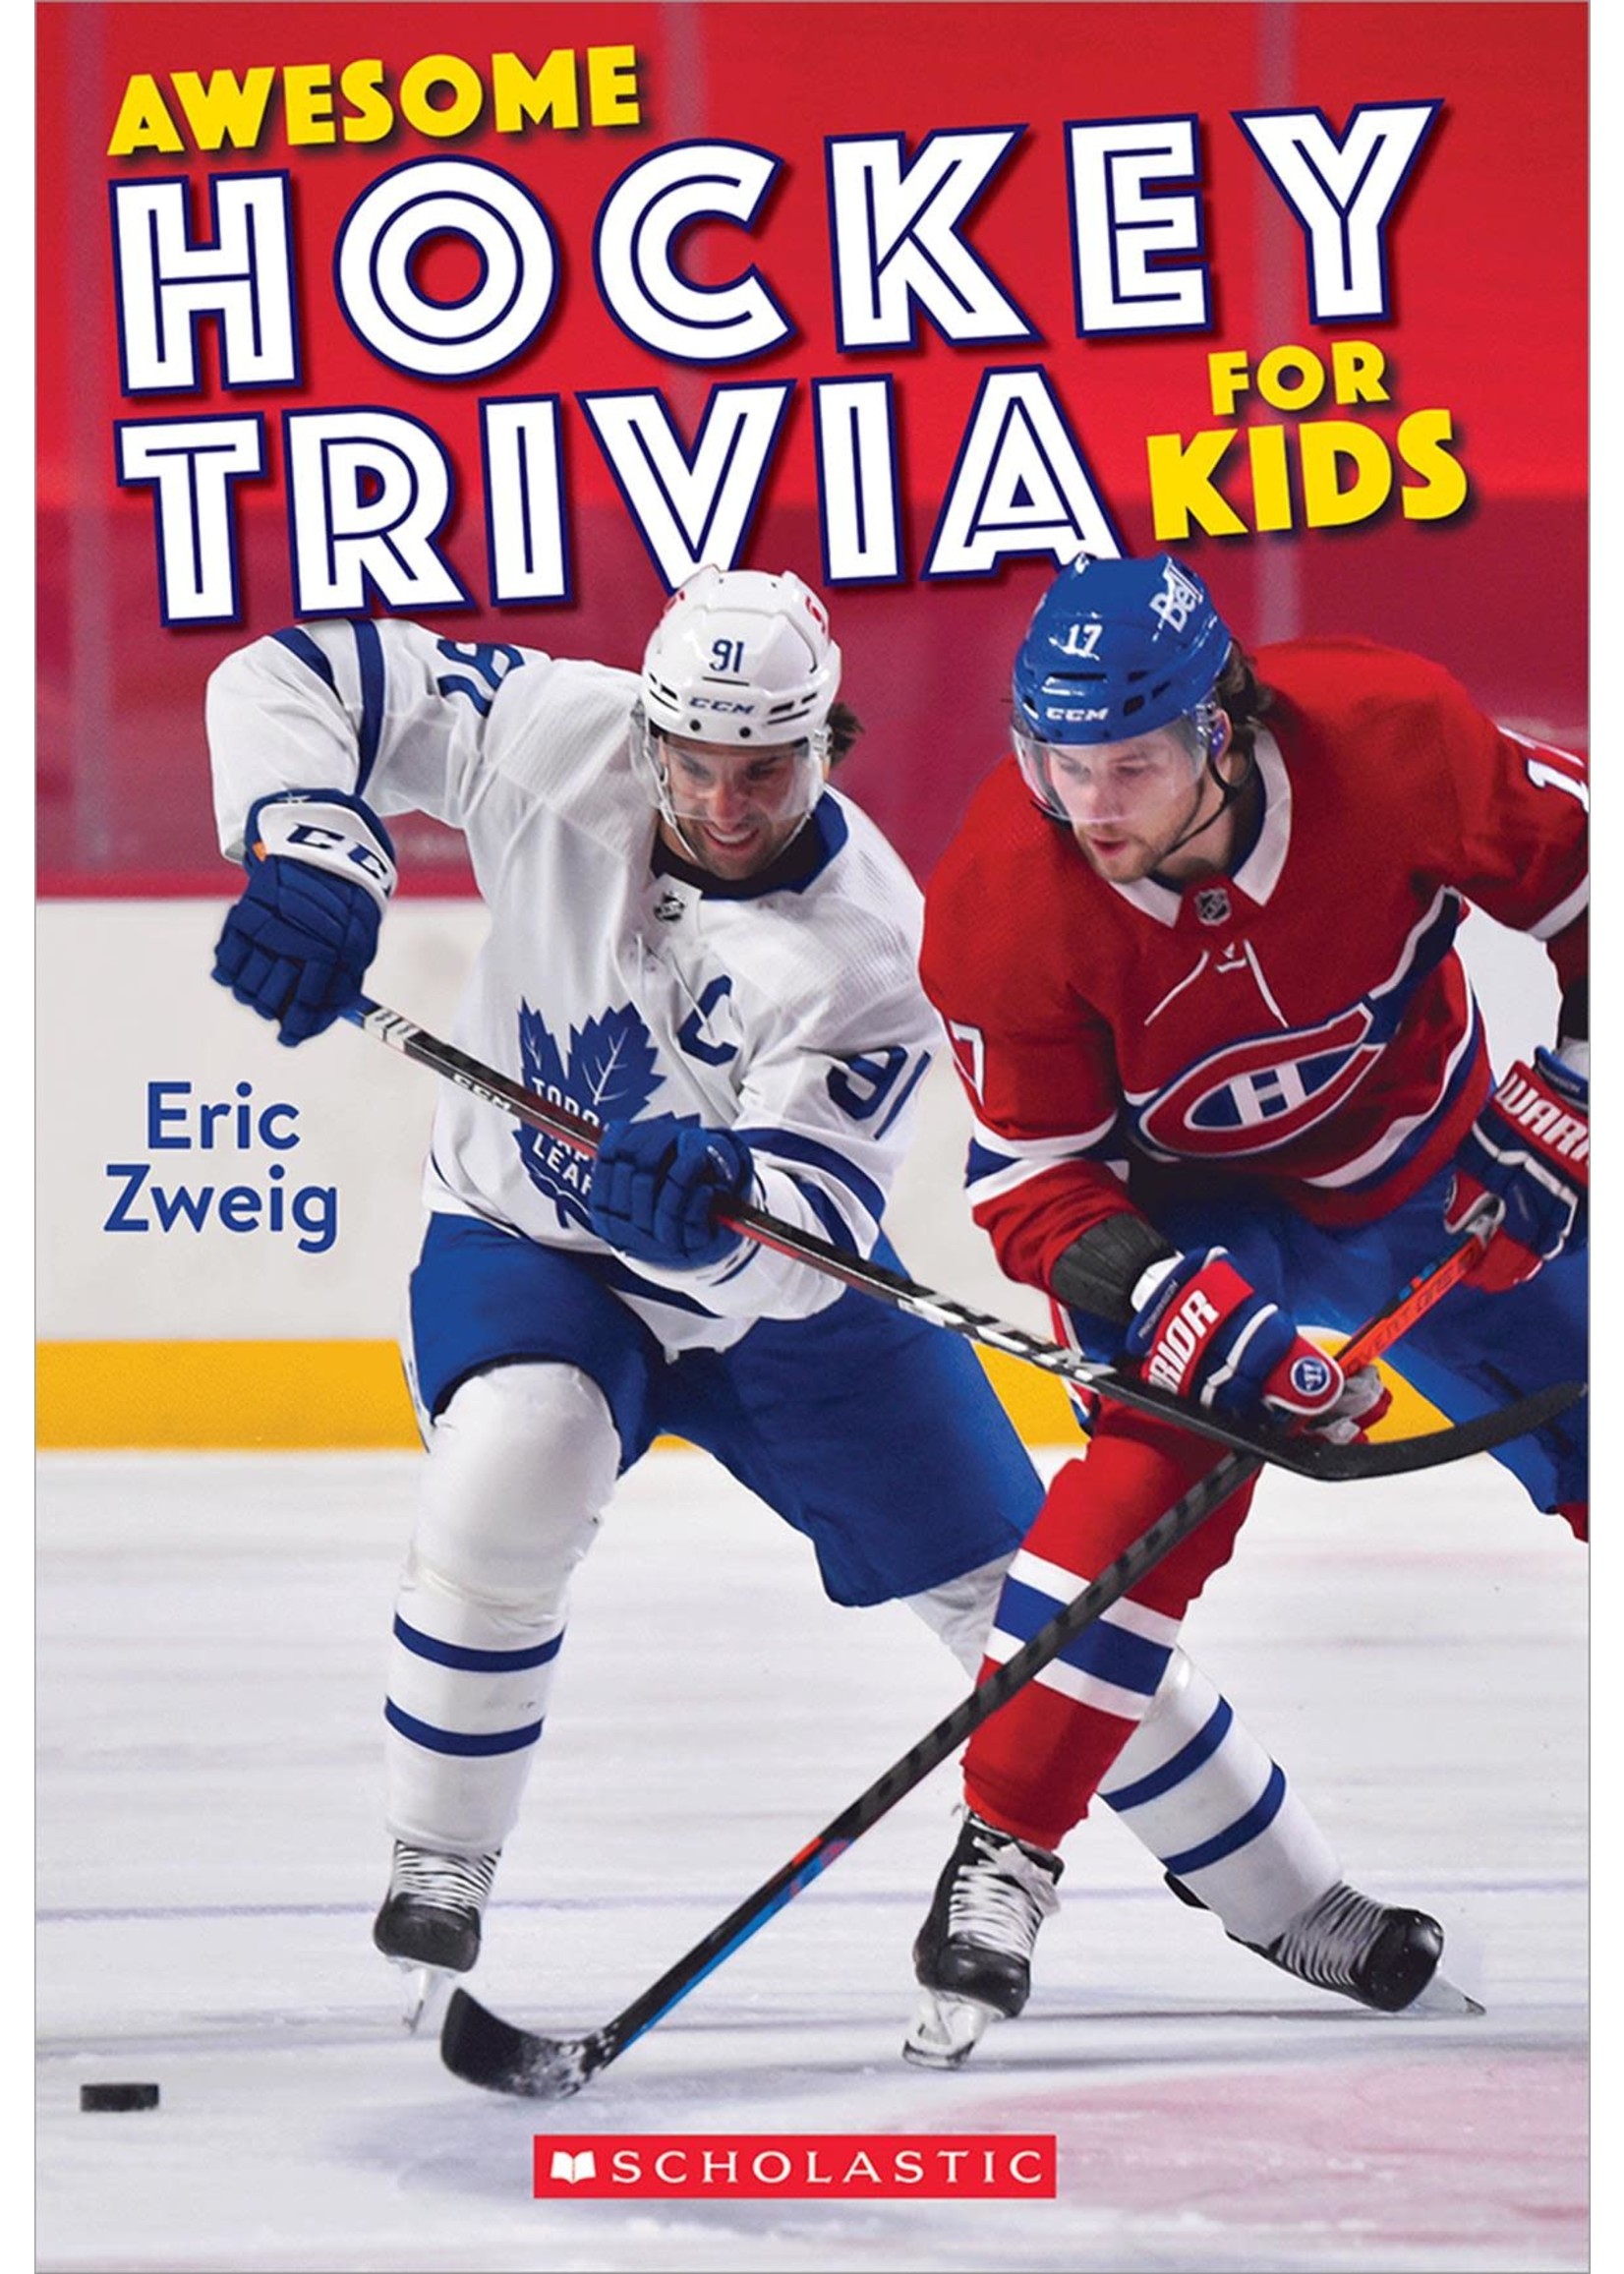 Awesome Hockey Trivia for Kids by Eric Zweig